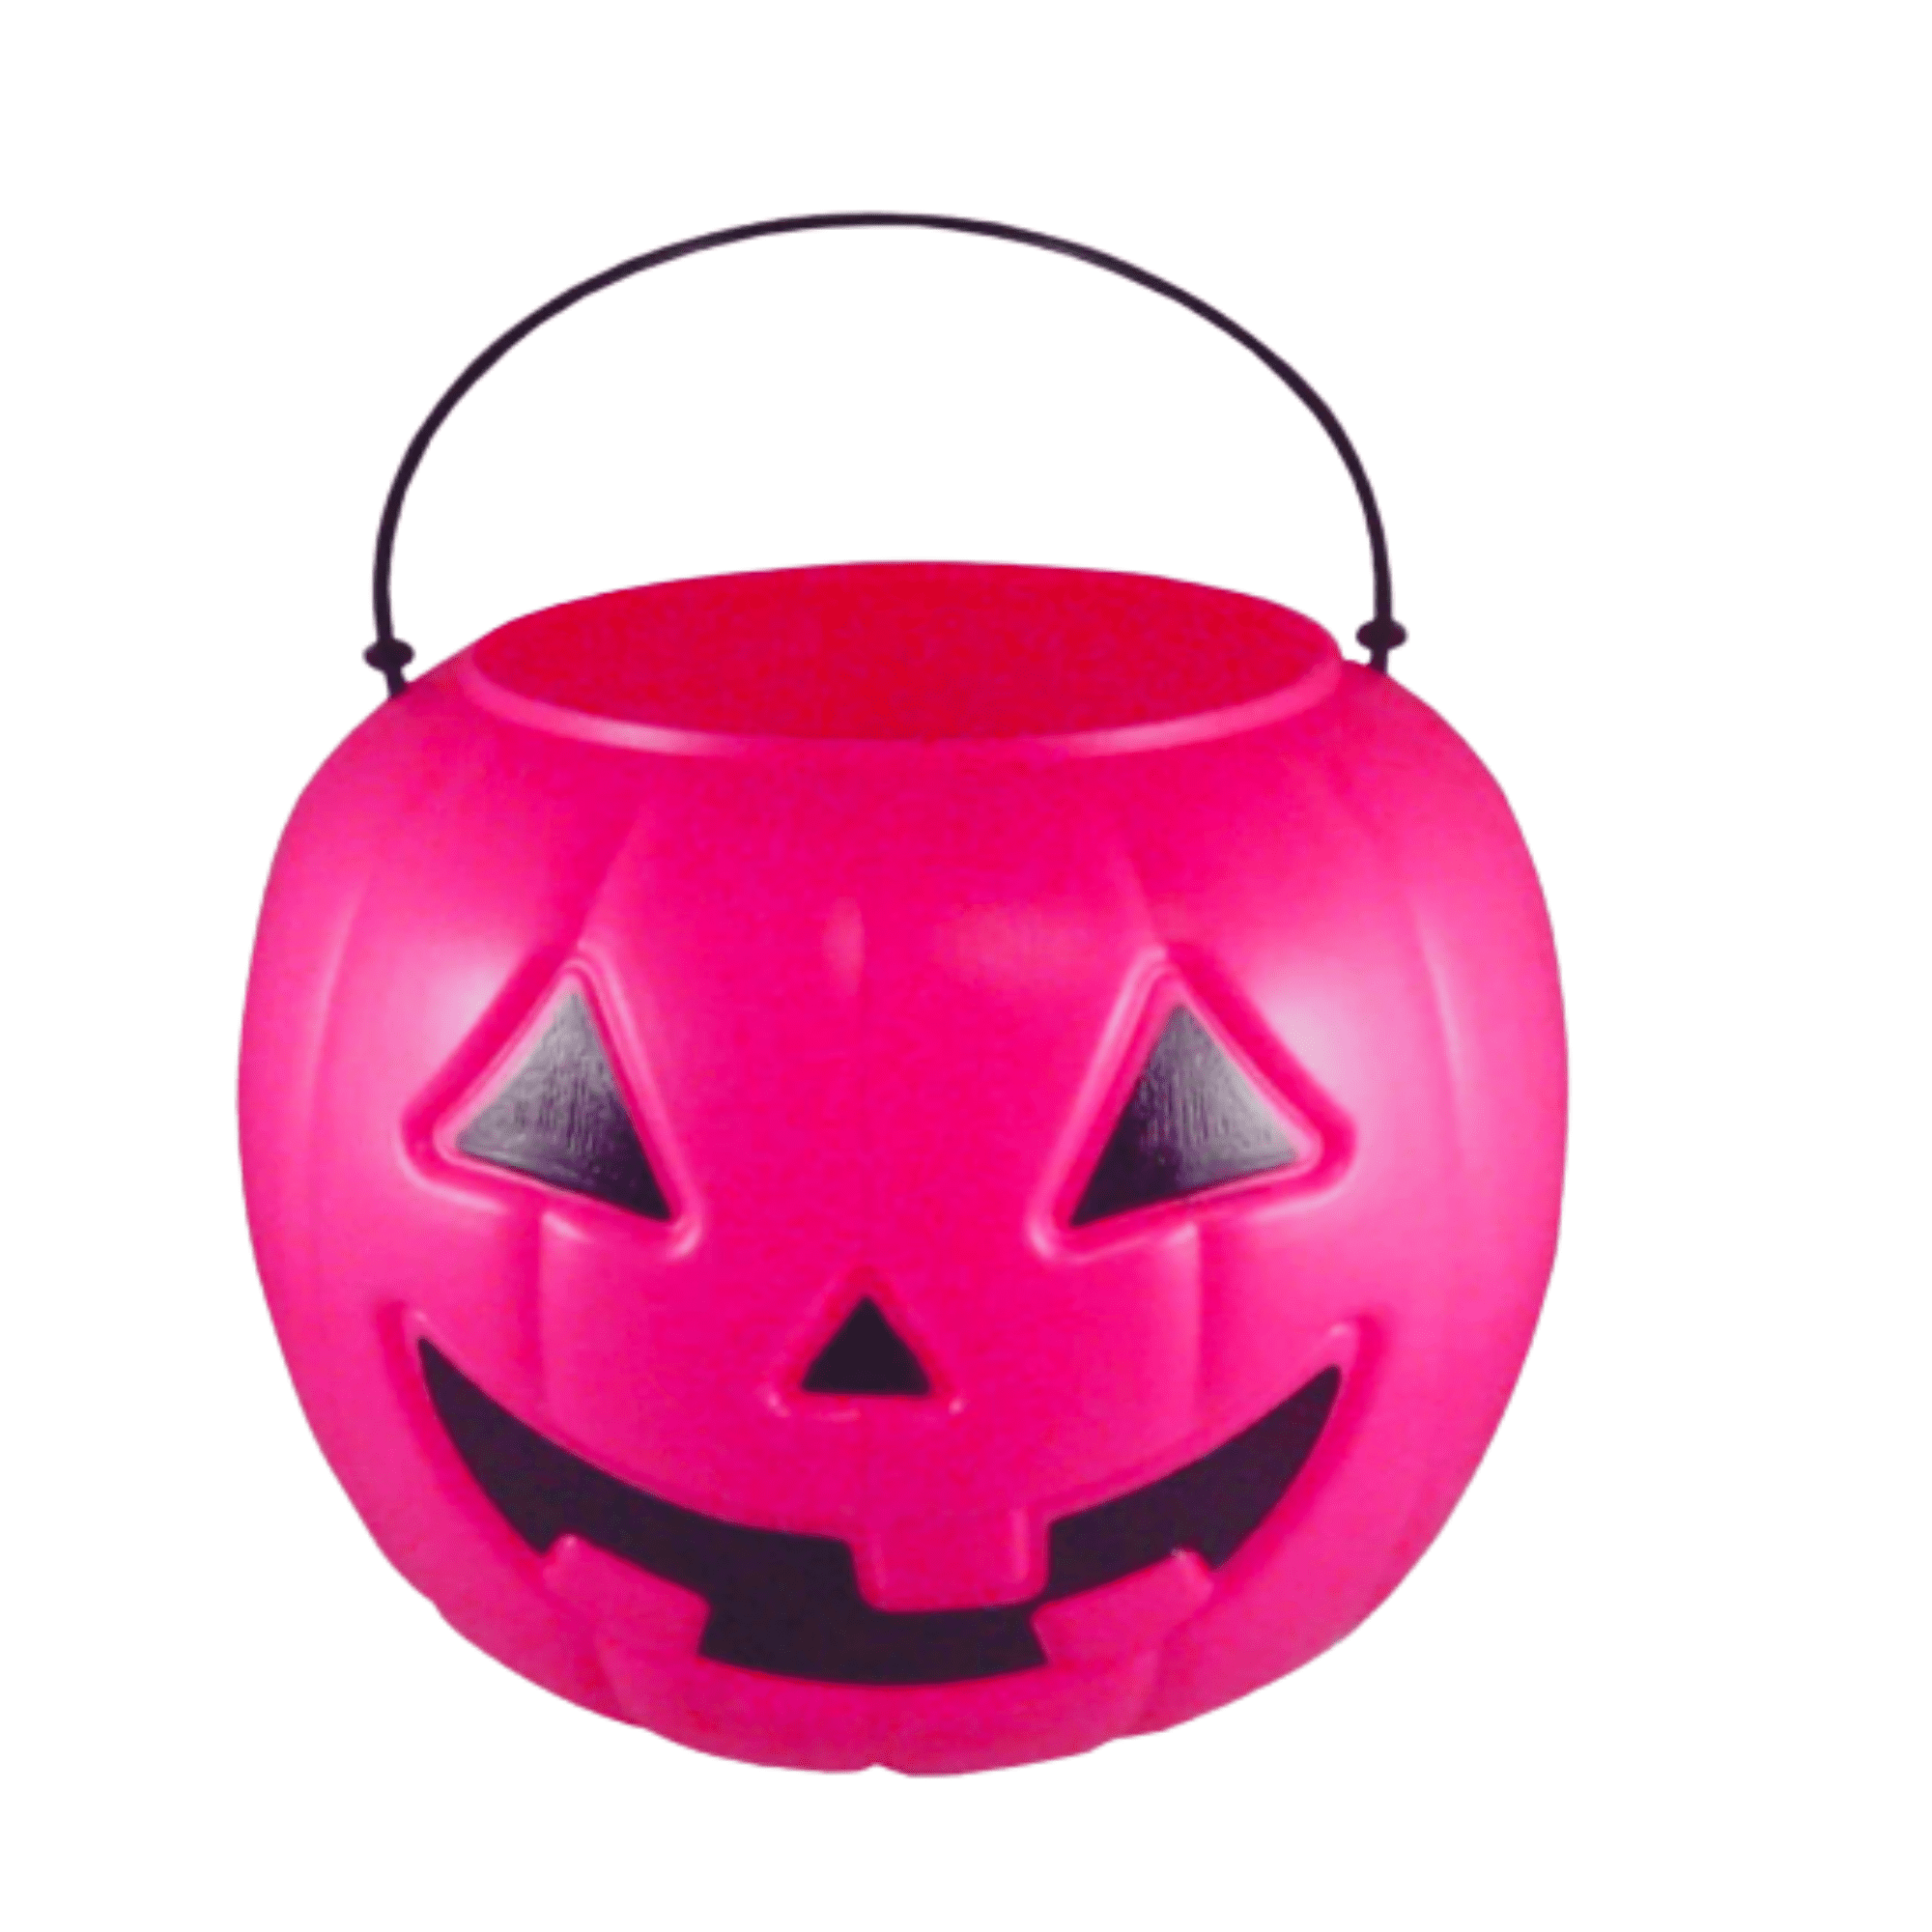 Amscan 250645 Plastic Party Favour Bucket, Apple Red